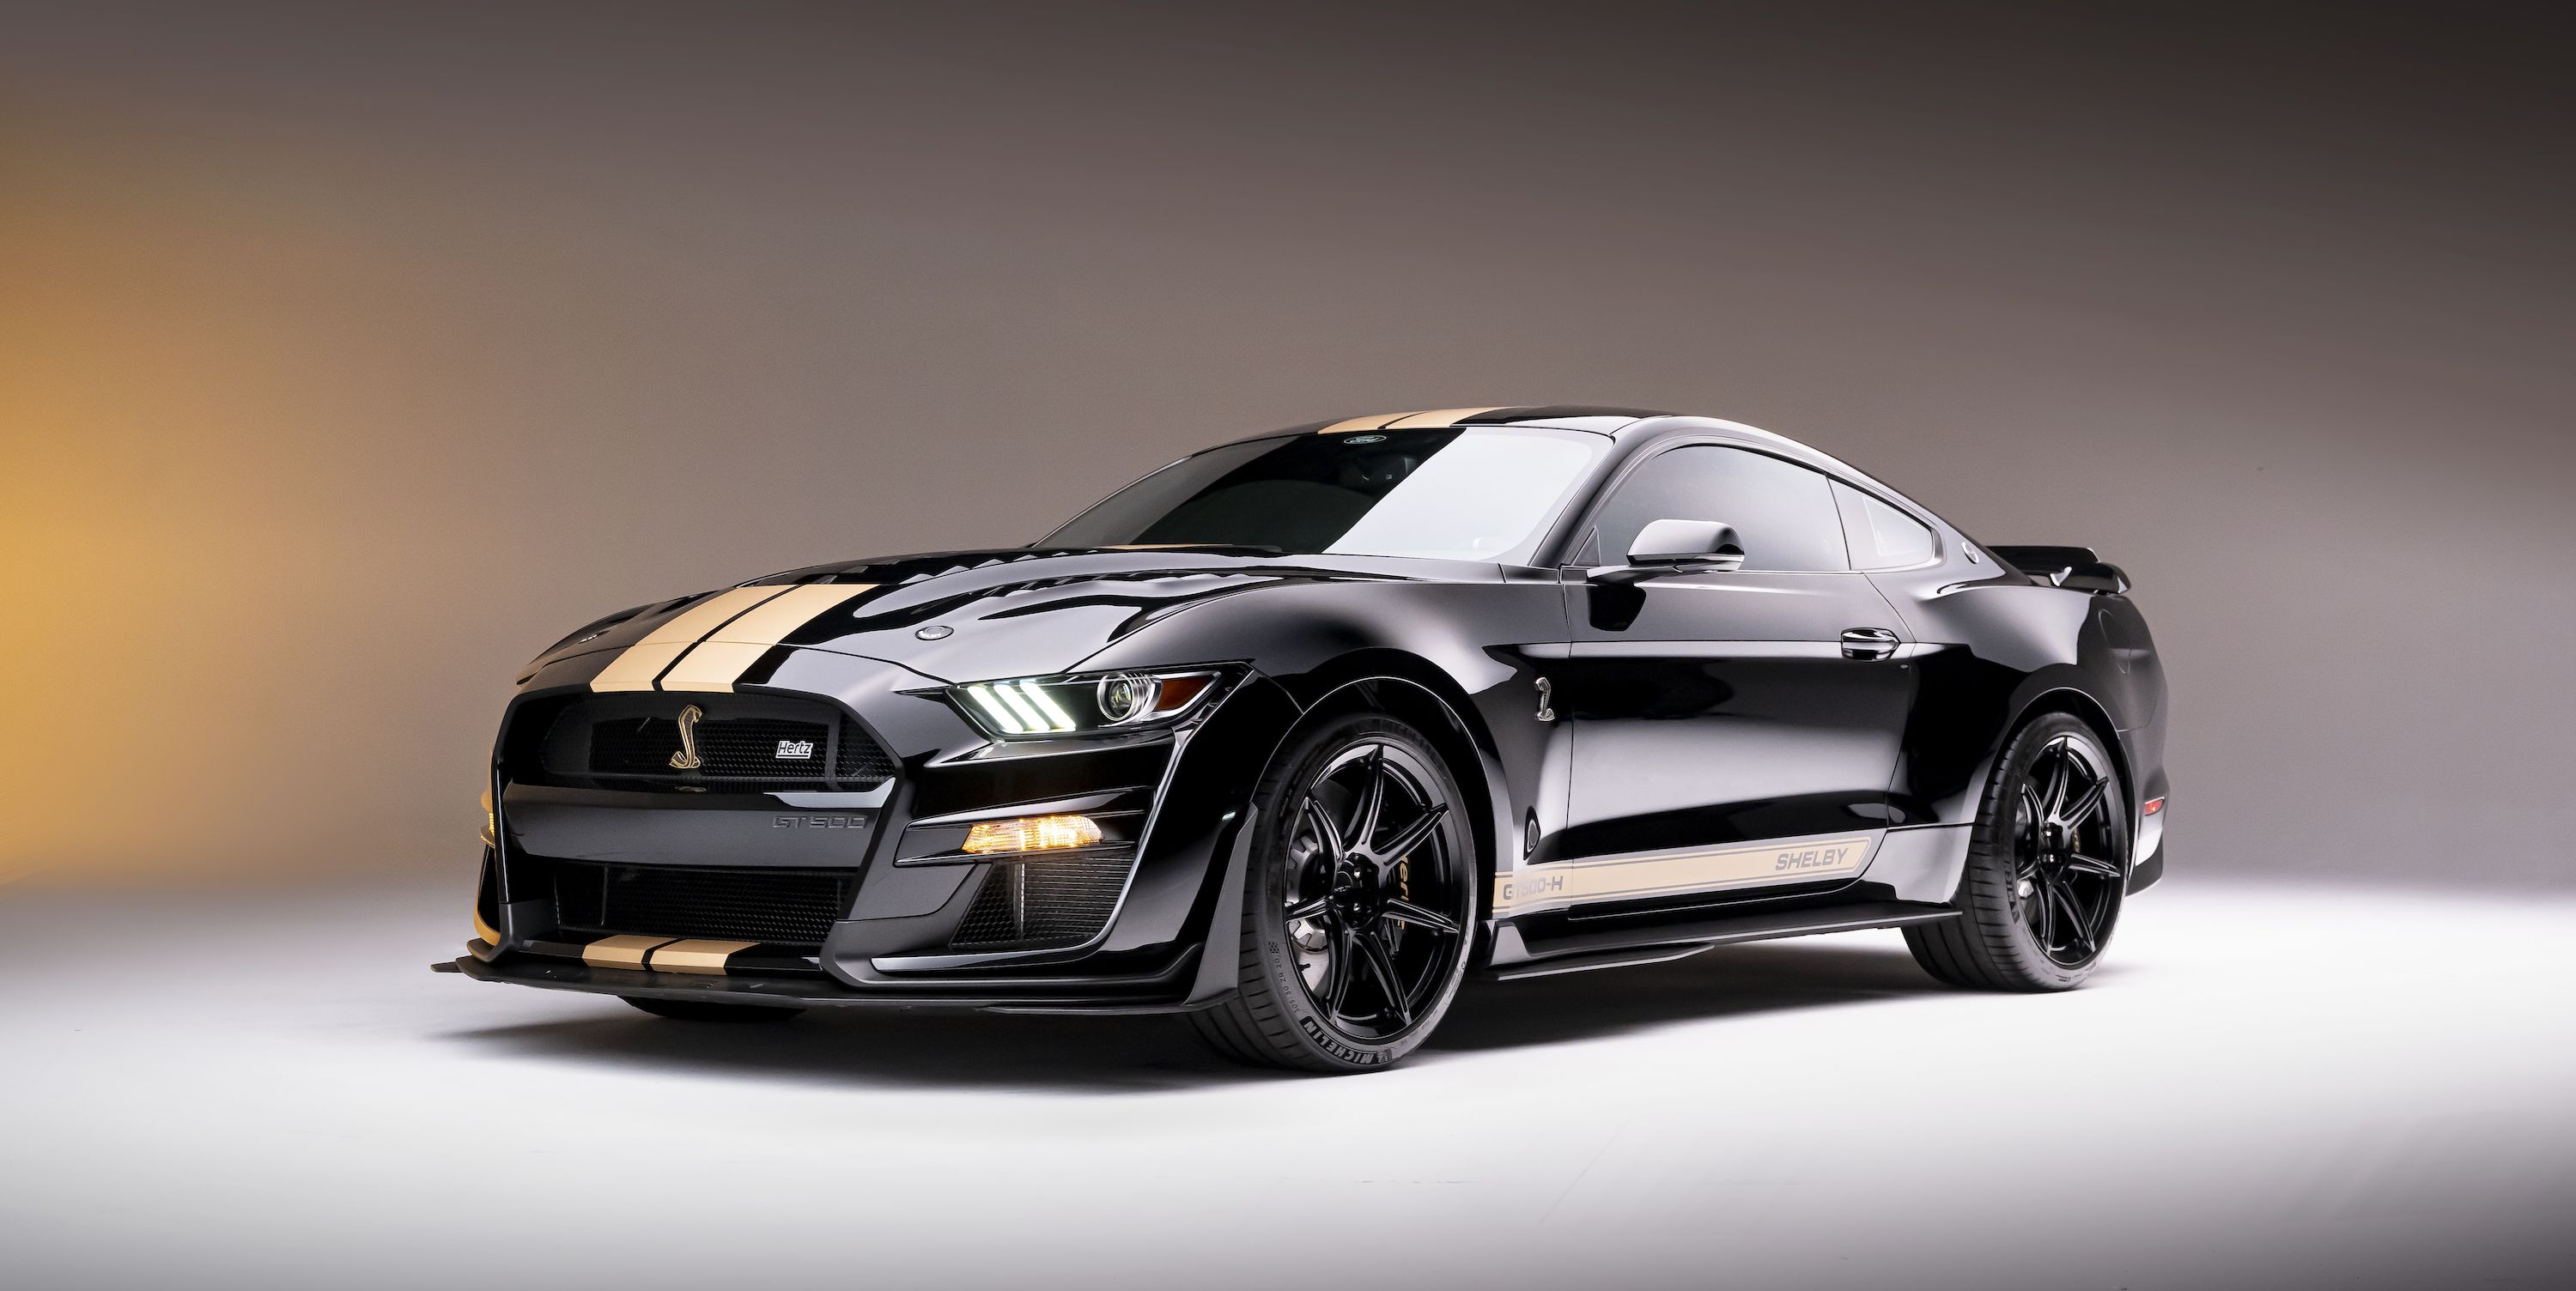 You Can Now Rent a 900-HP Shelby Mustang From Hertz